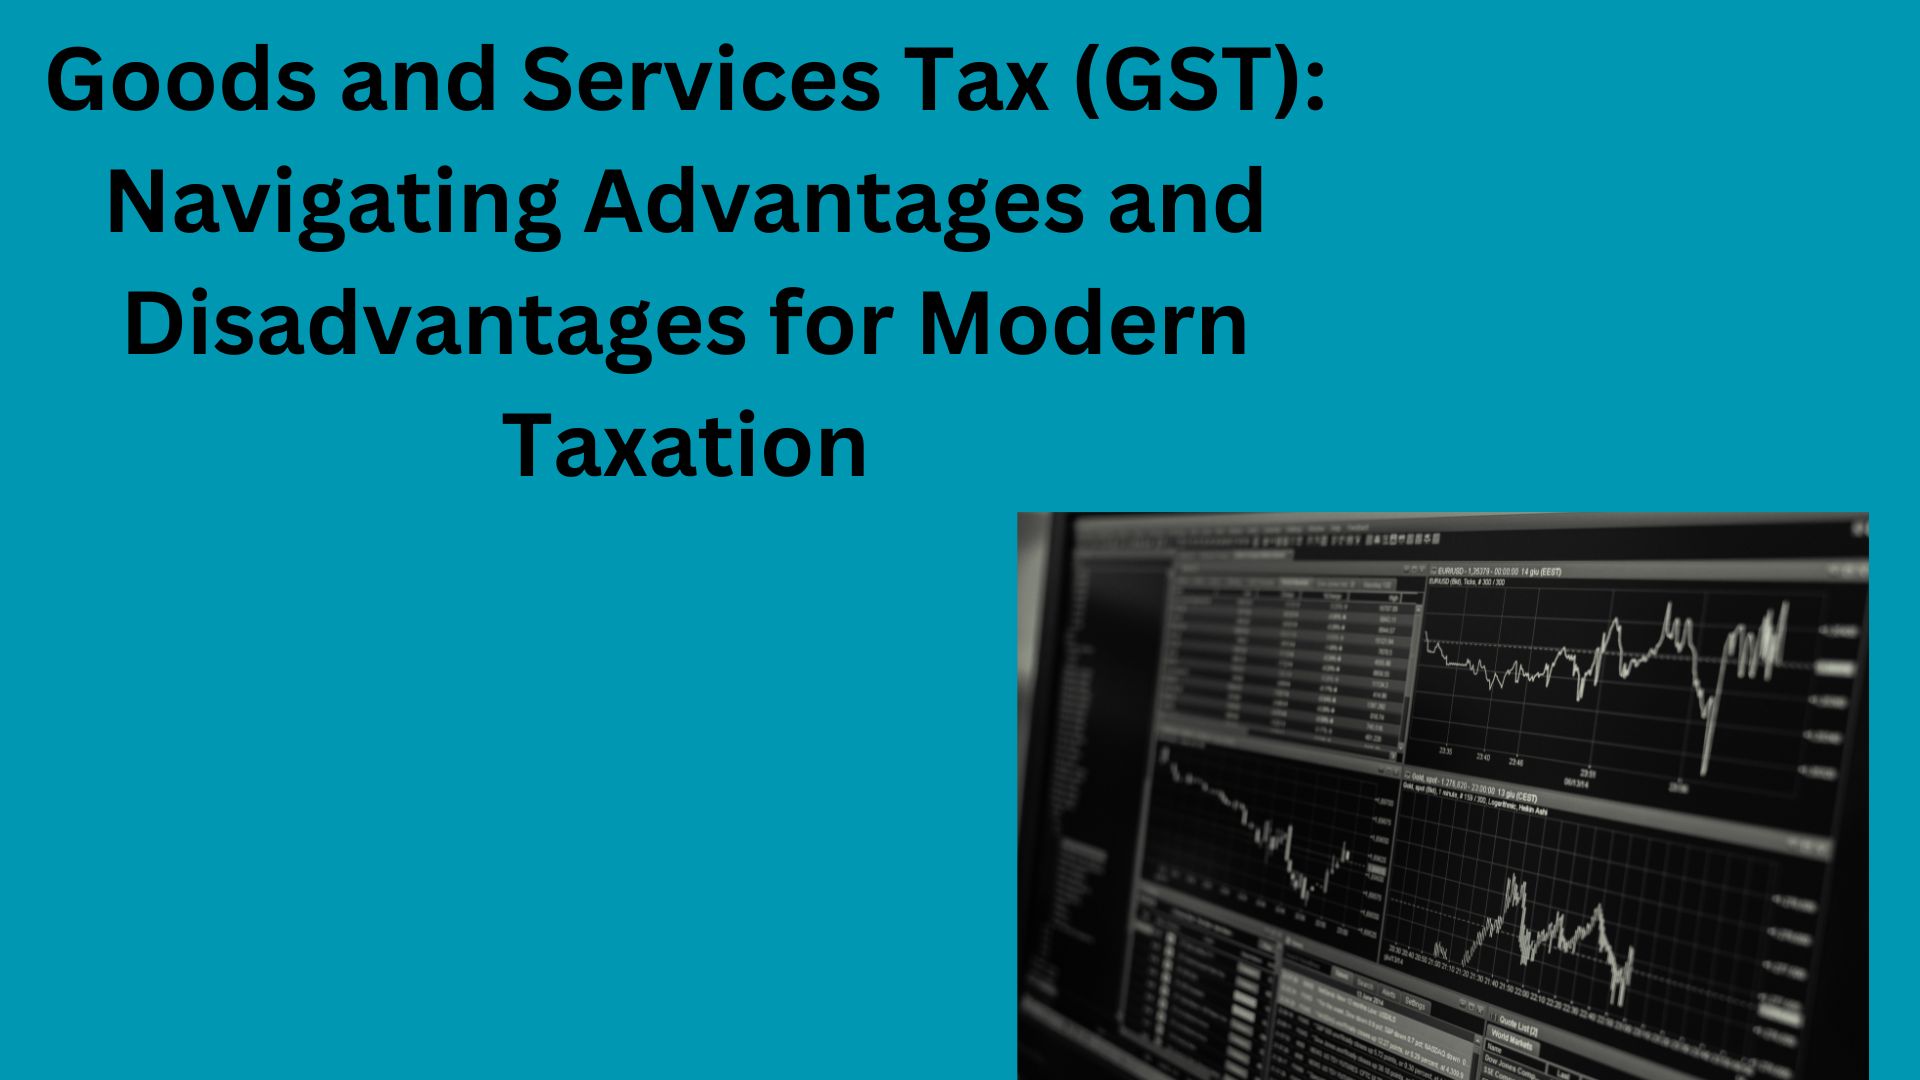 Goods and Services Tax (GST): Navigating Advantages and Disadvantages for Modern Taxation